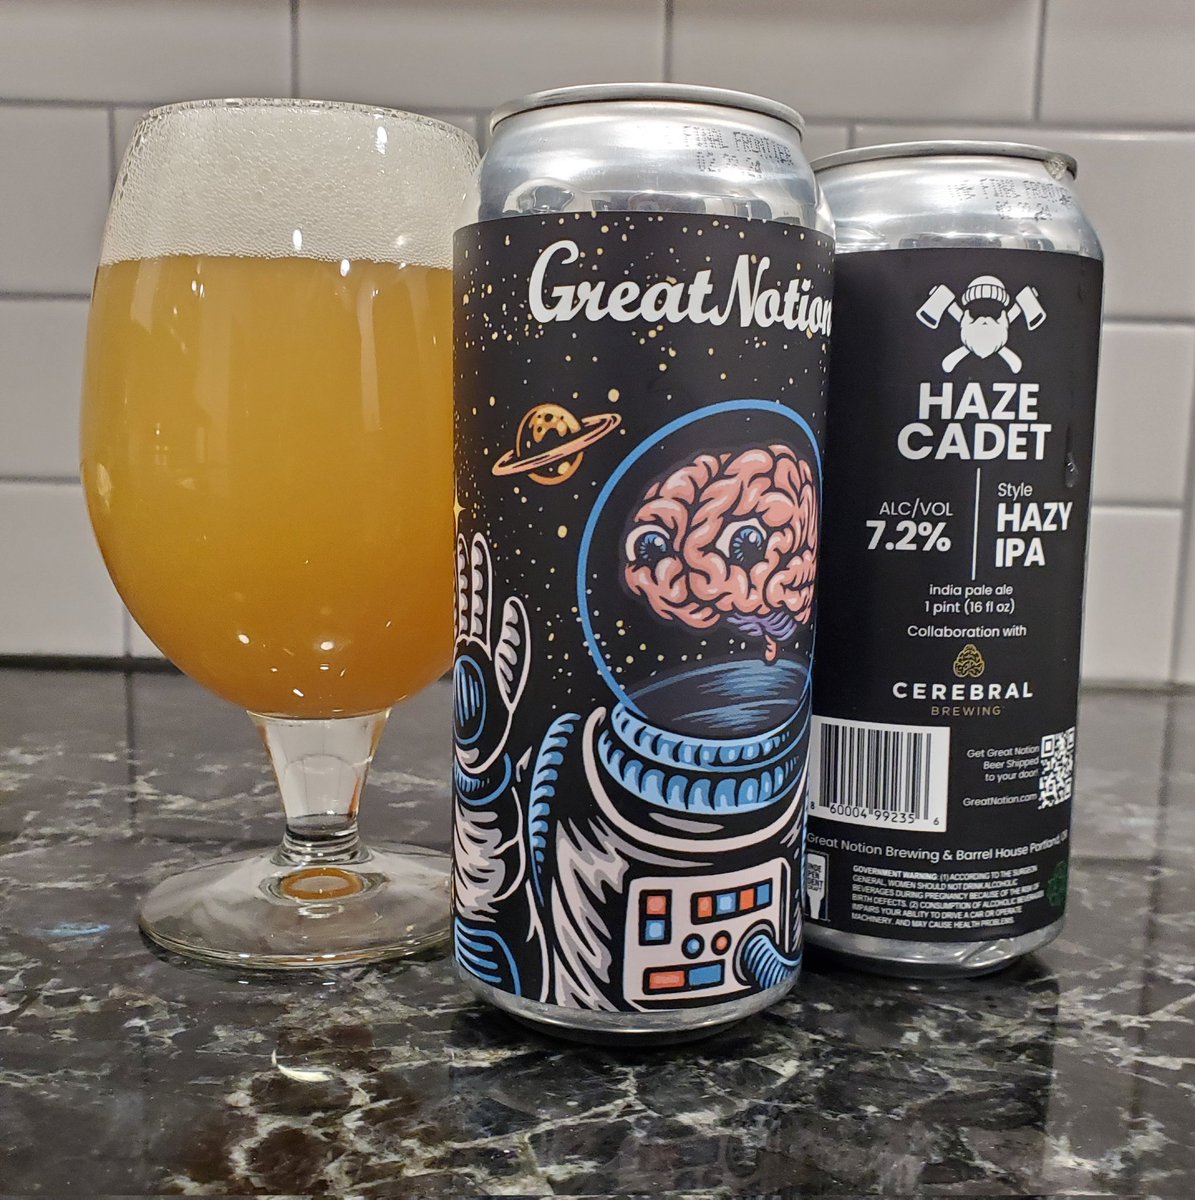 Haze Cadet IPA by Great Notion Brewing in collaboration with Cerebral Brewing - 2 of my favorite breweries! Cheers Peeps 🍻 This is 🔥 @ephoustonbill @BPlohocky @DRE_Go_Fish @D_V_T_ @Senor_Greezy @mikeadam16 @badhopper @BigChiefSpyBoy #CraftBeer #beer